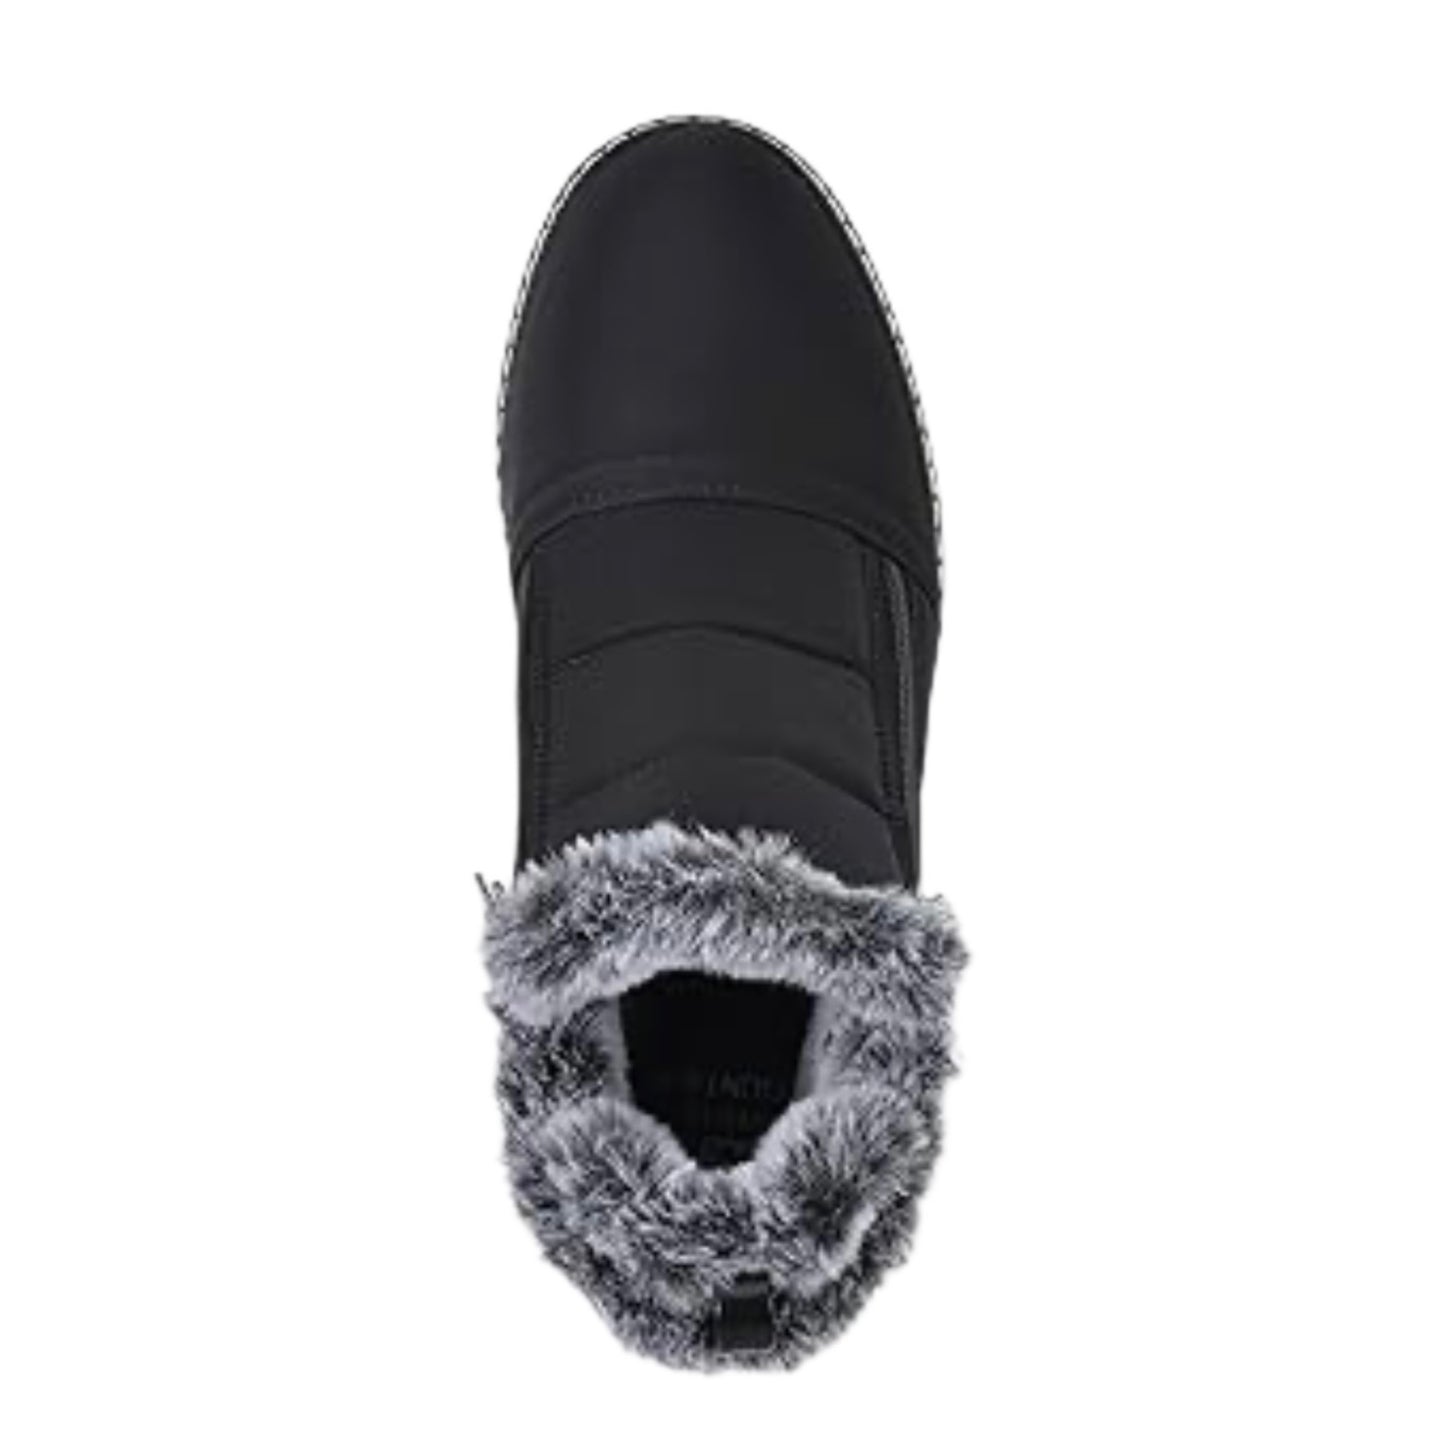 TAURUS Cold Weather Booties Women's Shoes